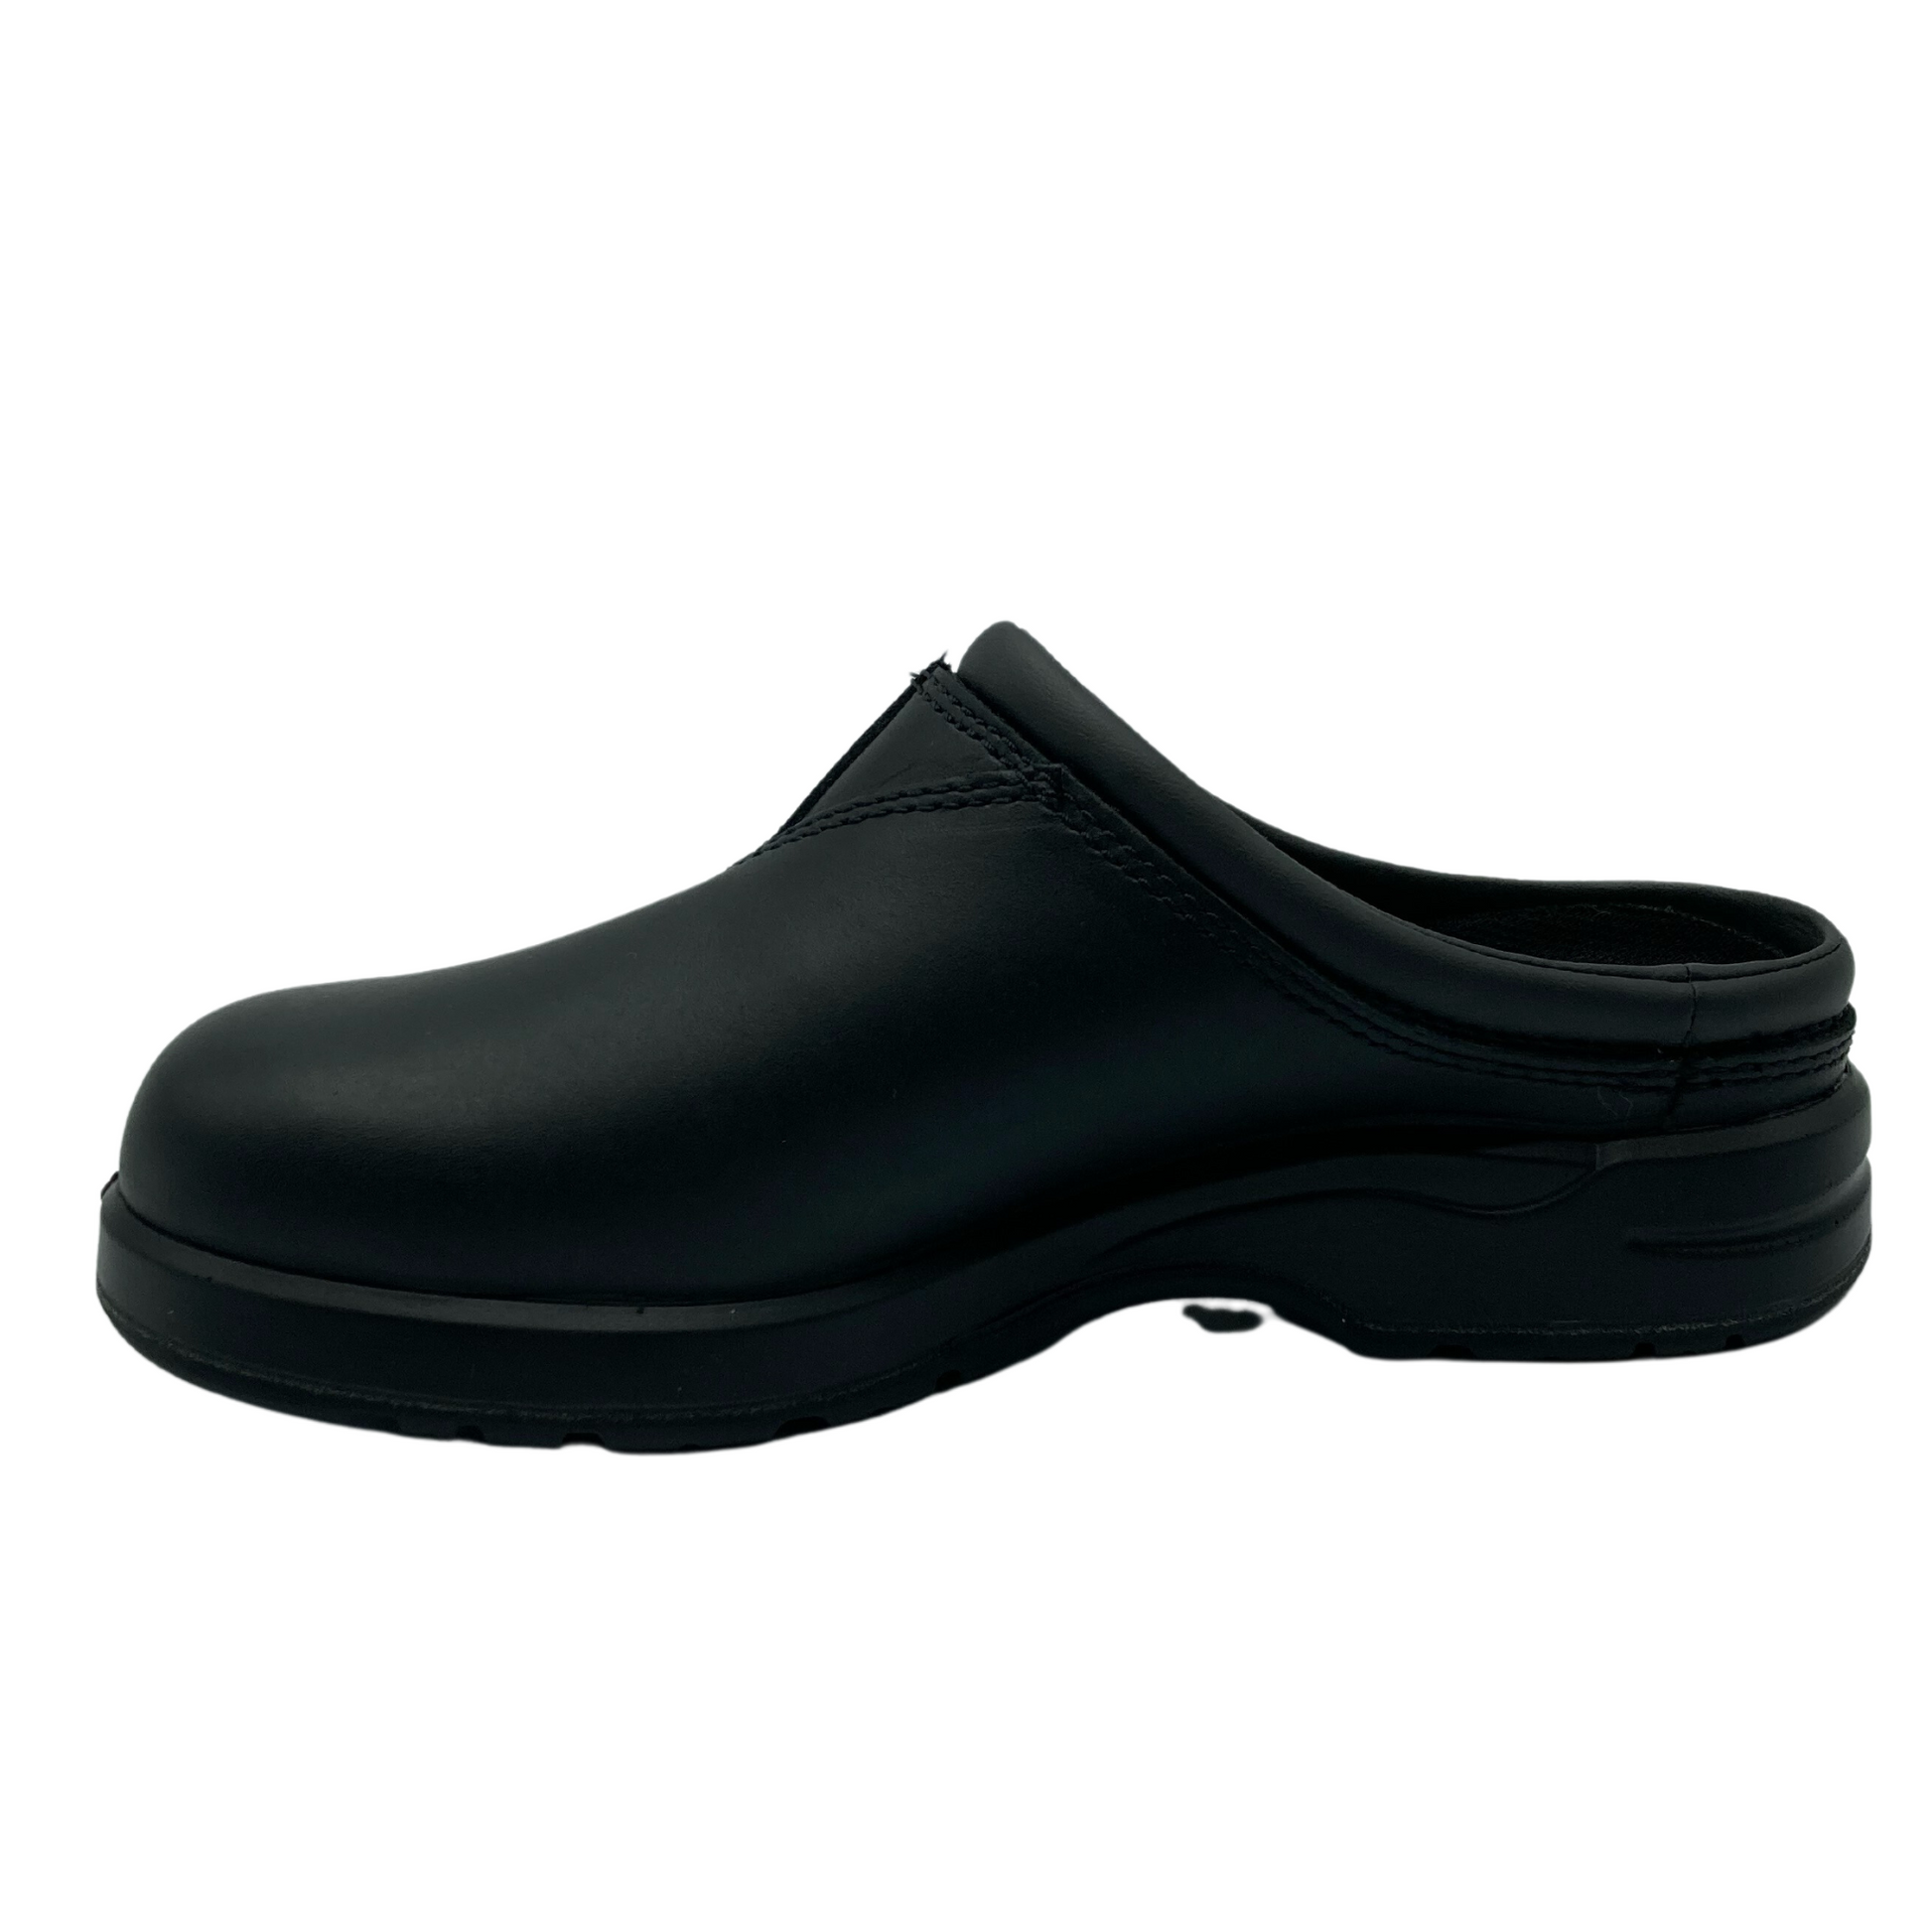 Left facing view of black leather clog with black rubber outsole